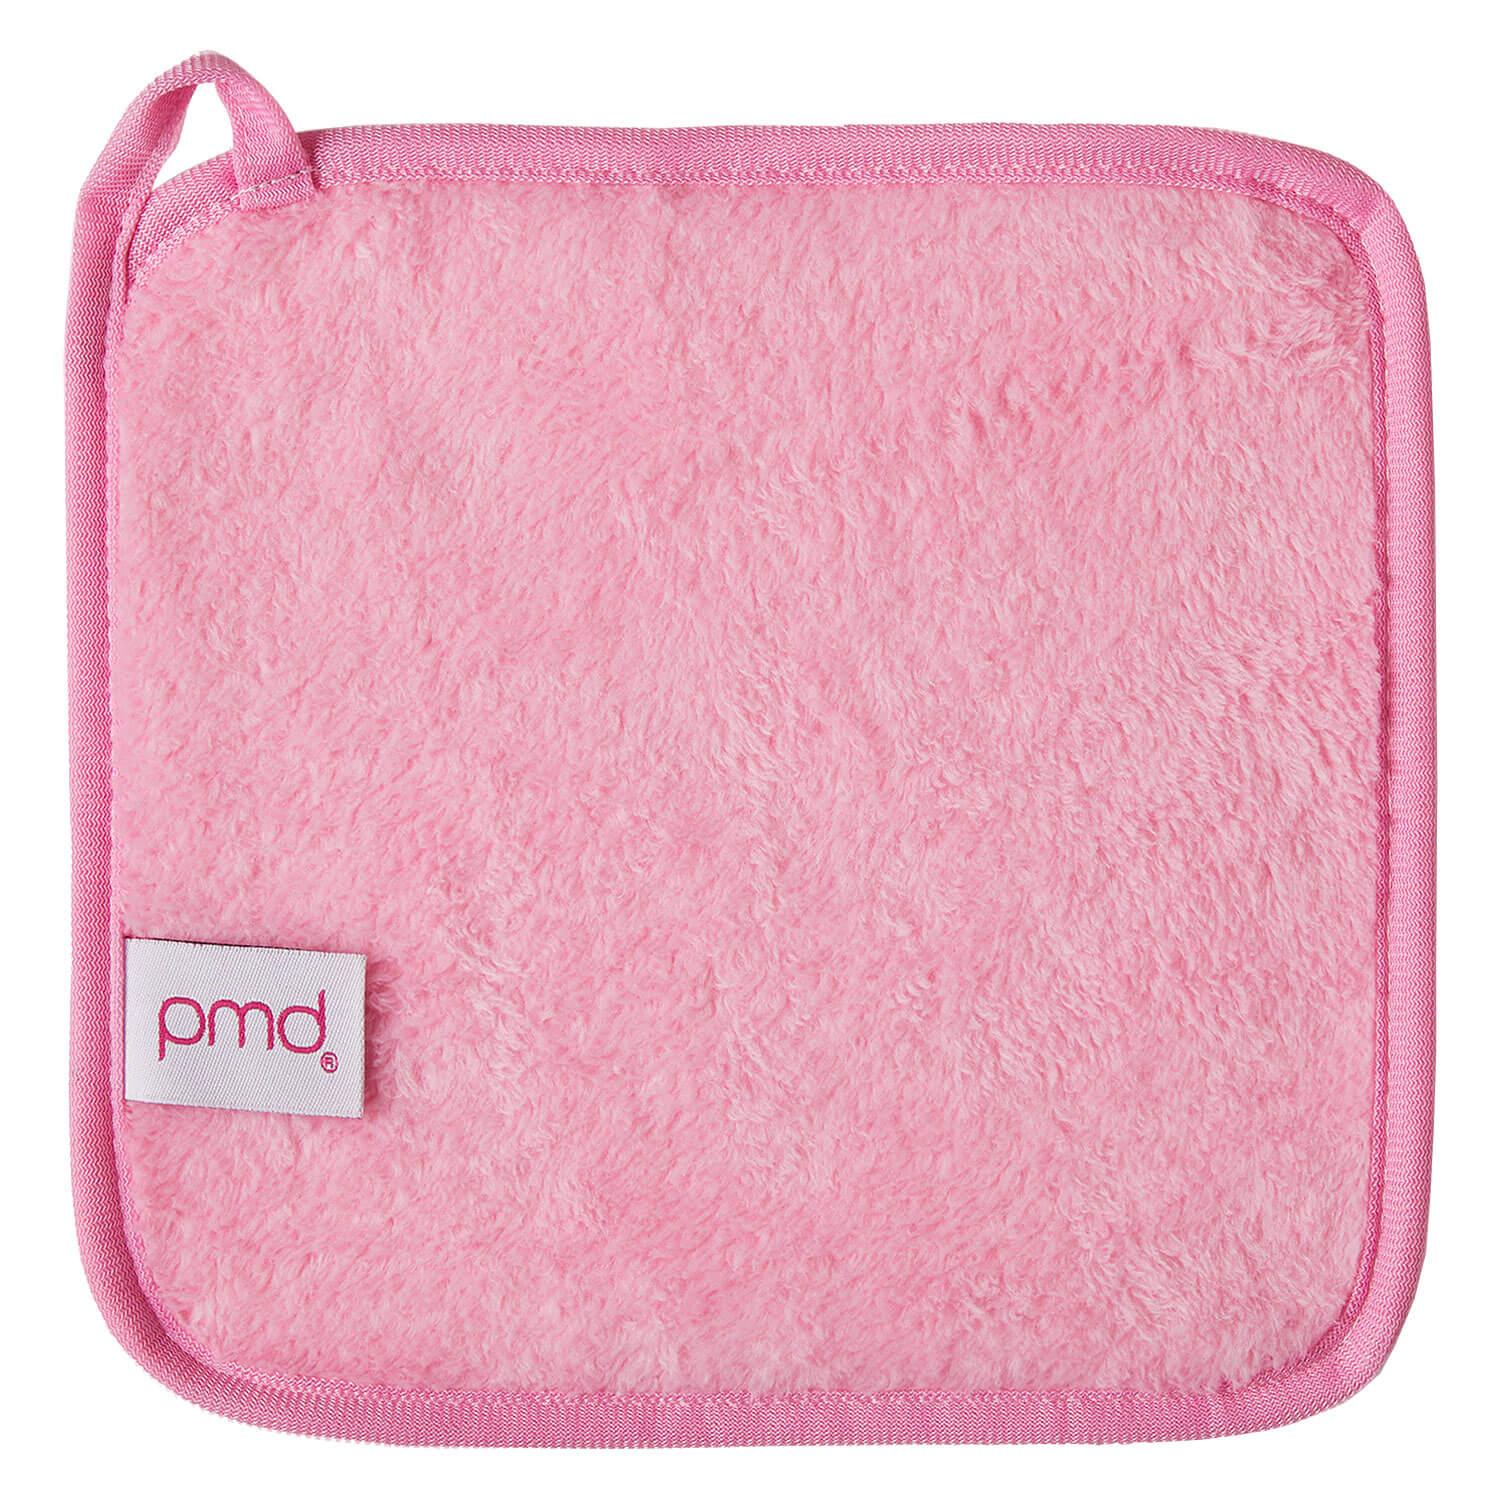 pmd - silverpure Makeup Removing Cloth